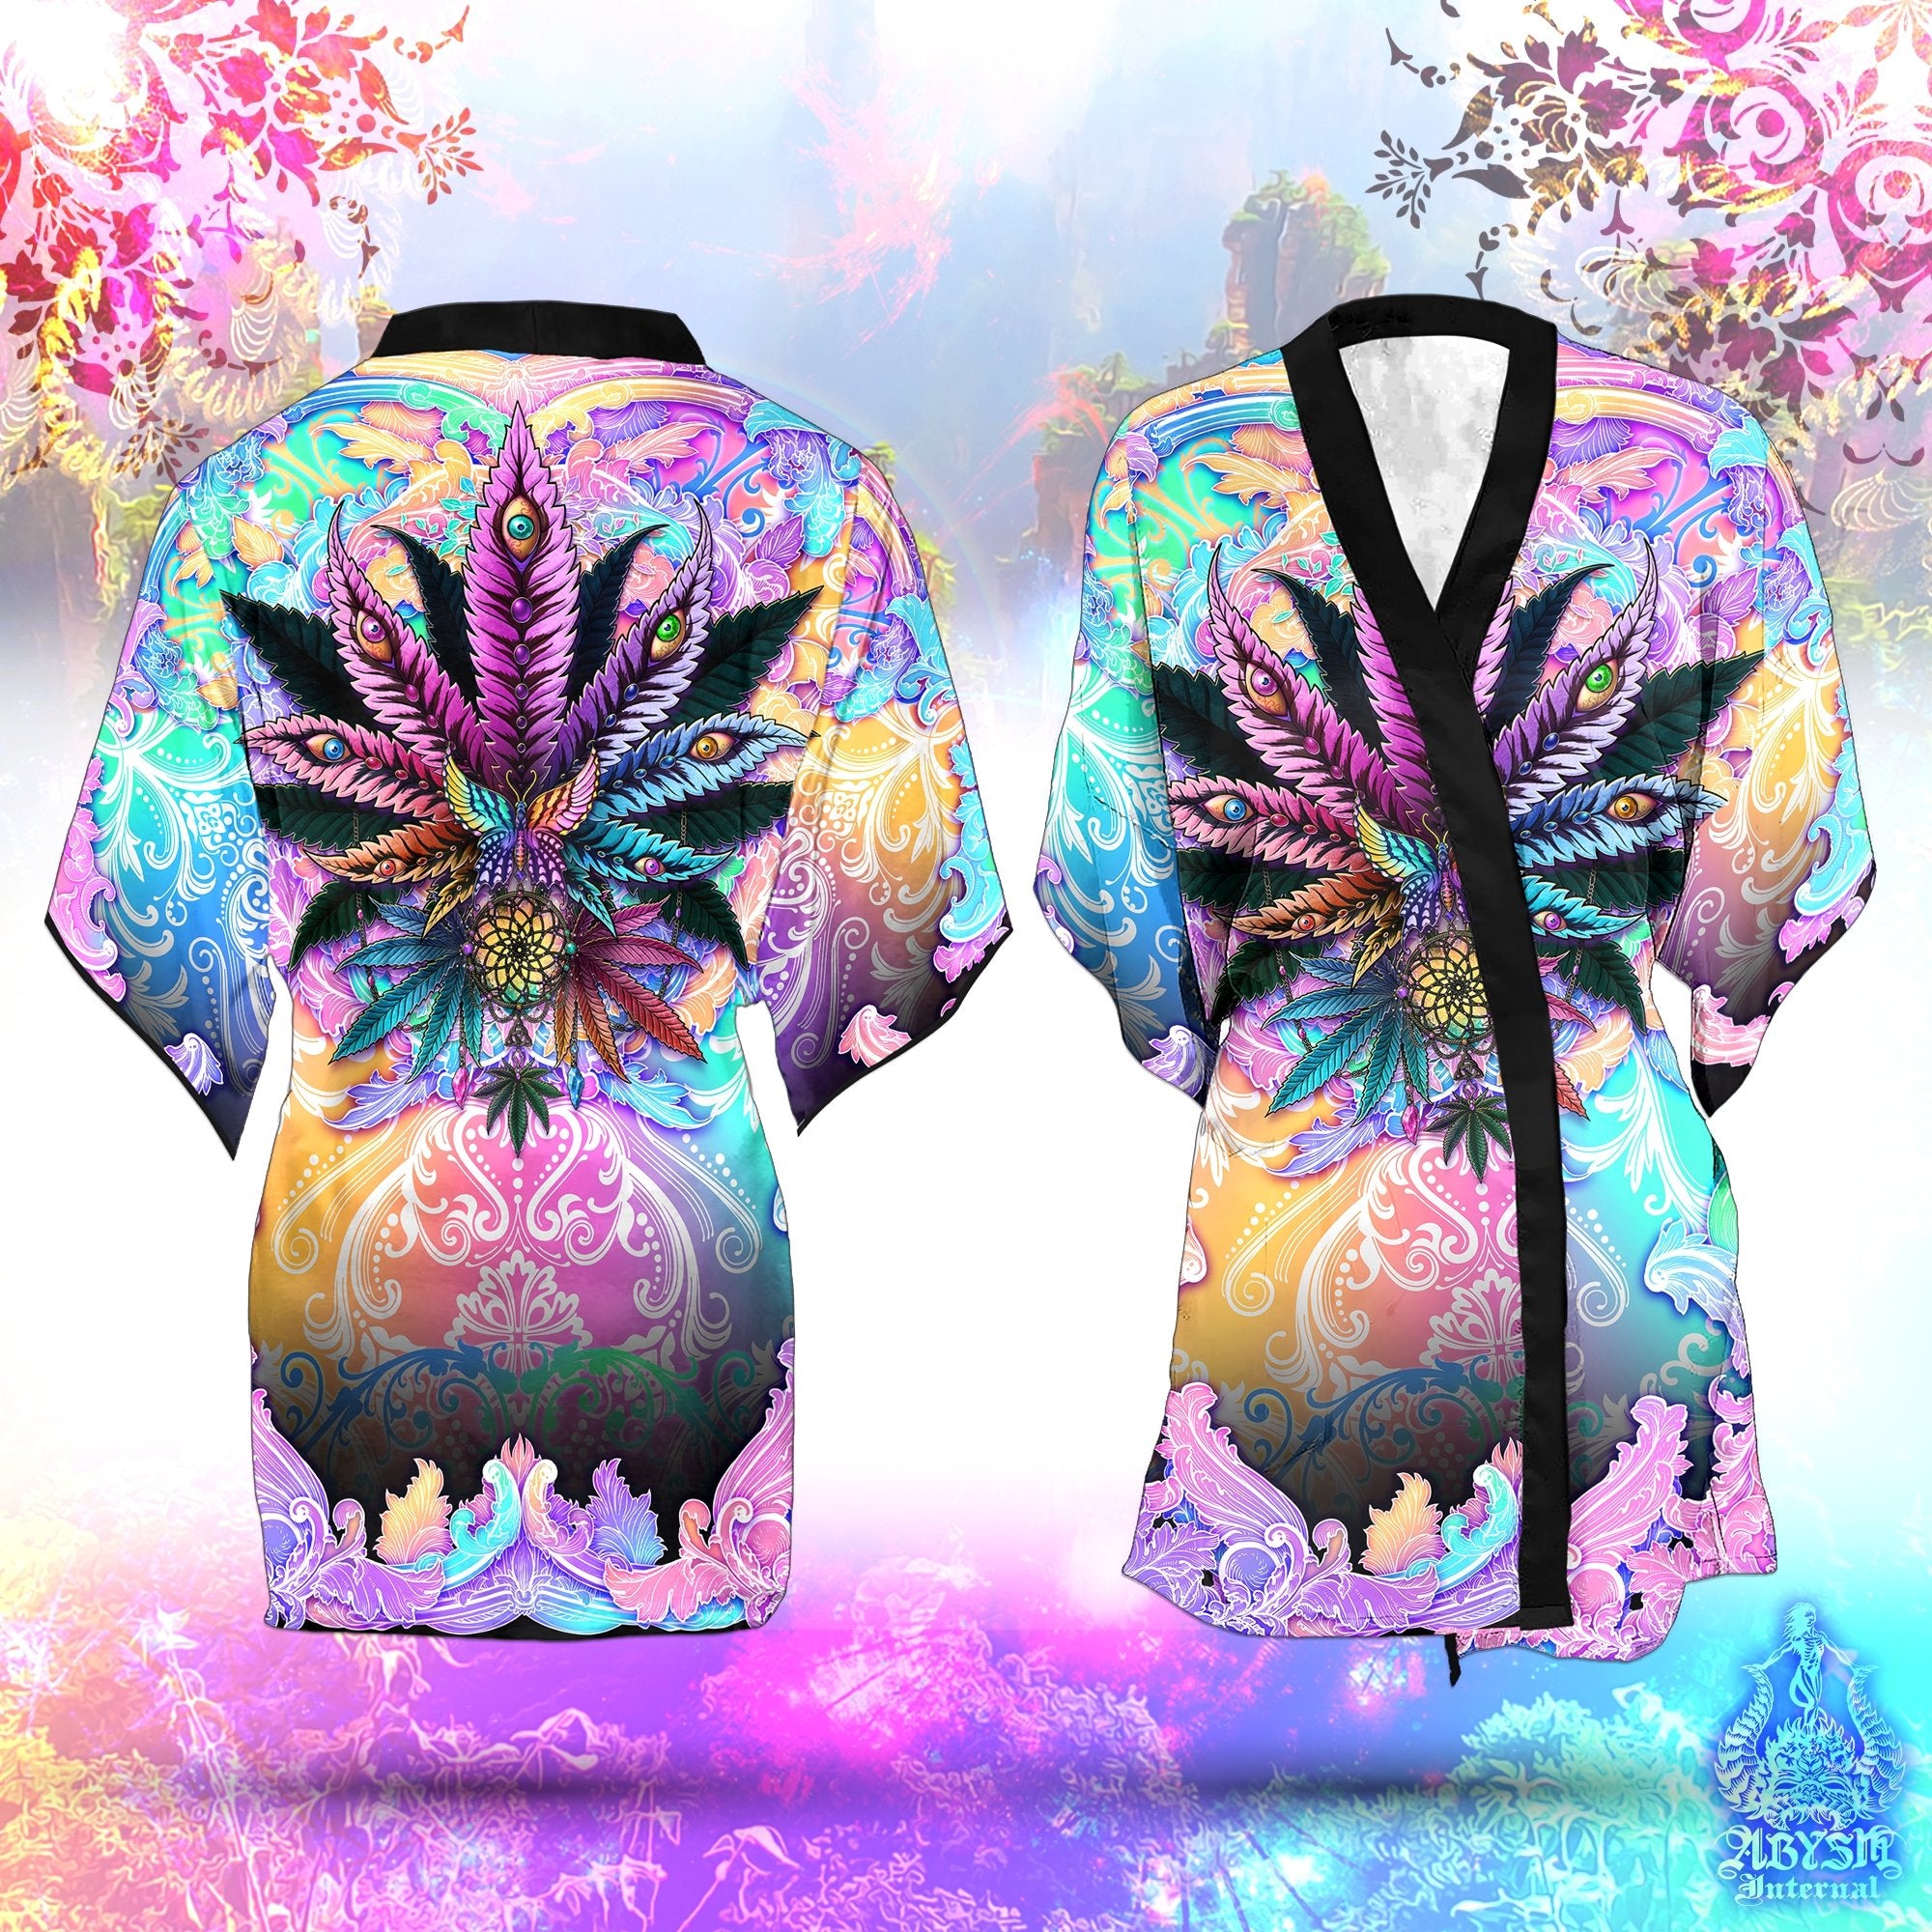 Weed Cover Up, Cannabis Outfit, Psy Party Kimono, Aesthetic Summer Festival Robe, 420 Gift, Indie Clothing, Unisex - Marijuana, Pastel Black - Abysm Internal